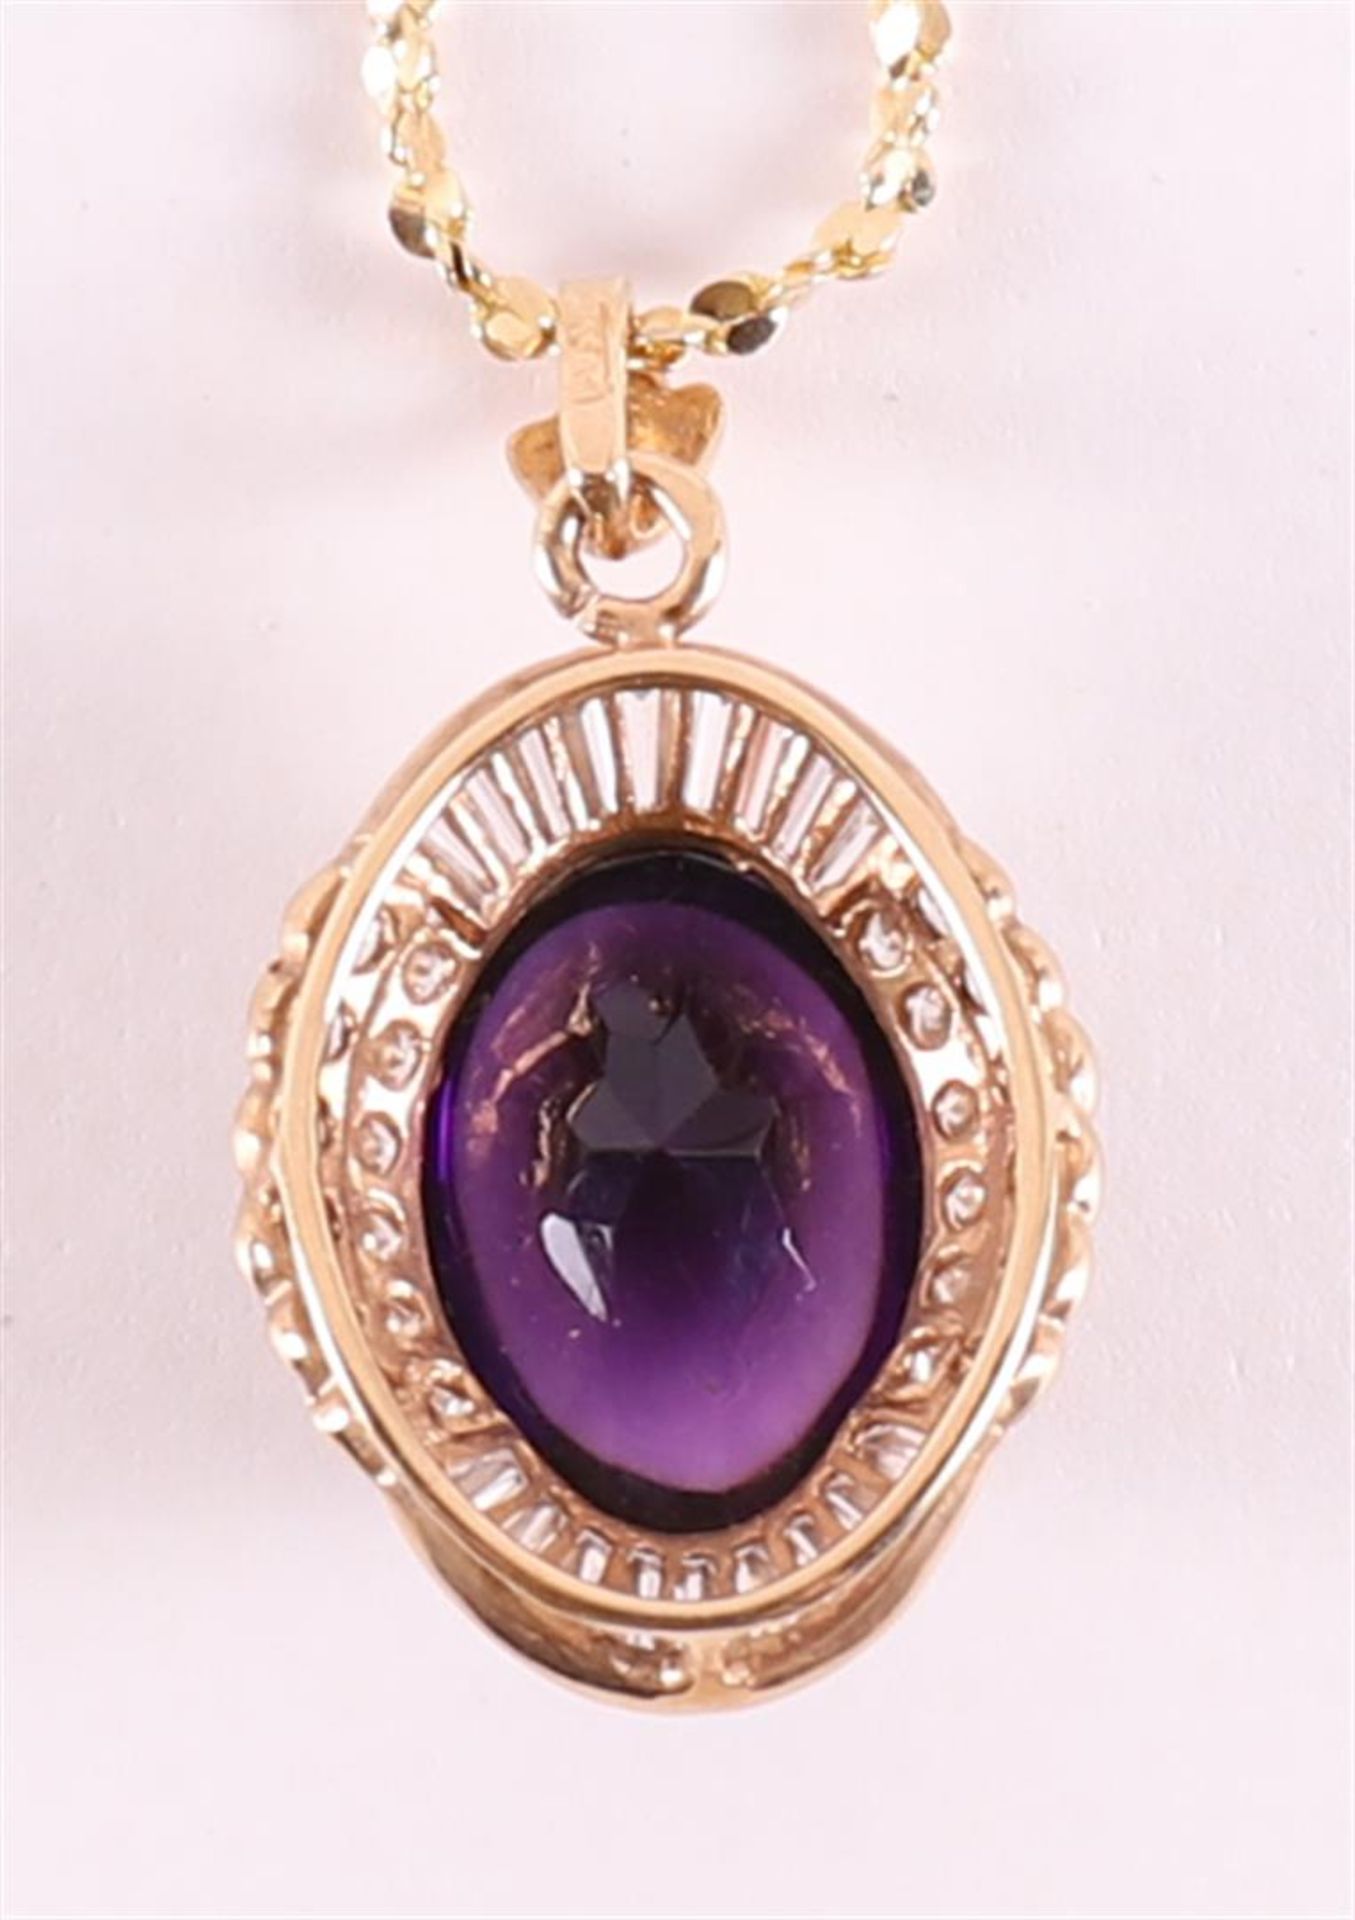 A 14 kt gold necklace and pendant with a cabochon cut amethyst. - Image 3 of 3